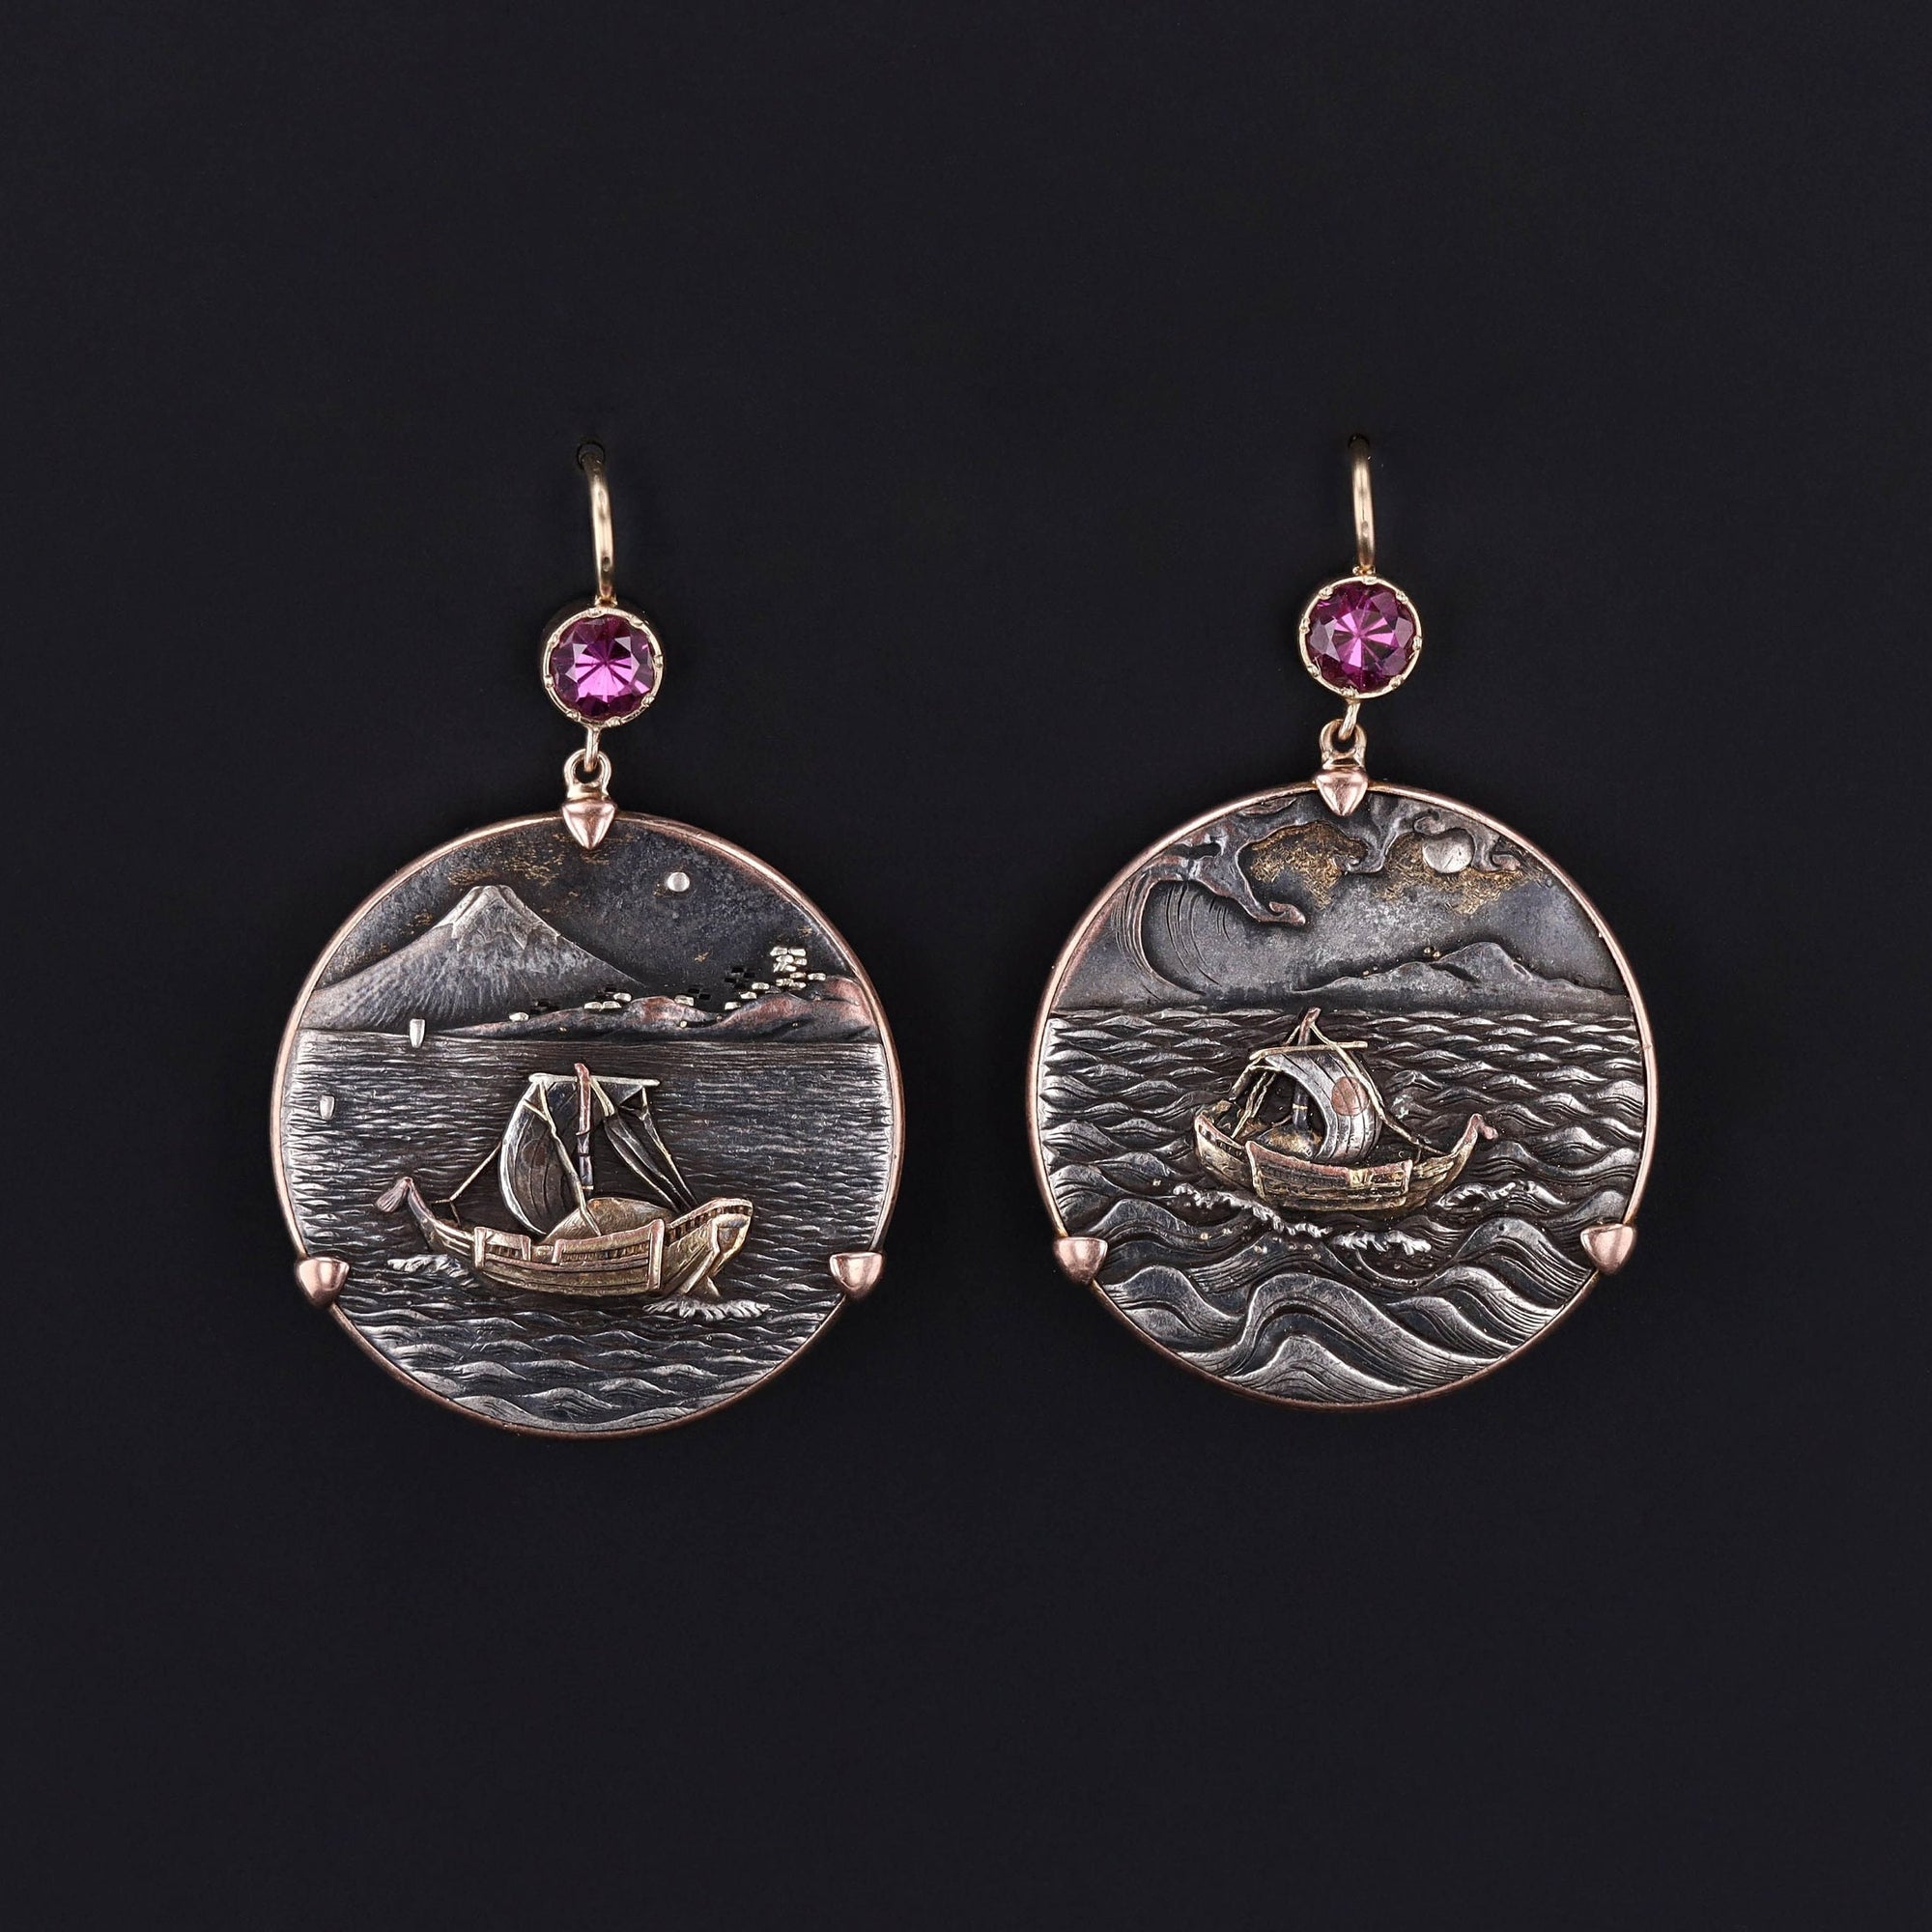 Antique Shakudo with Pink Tourmaline Earrings of 14k Gold